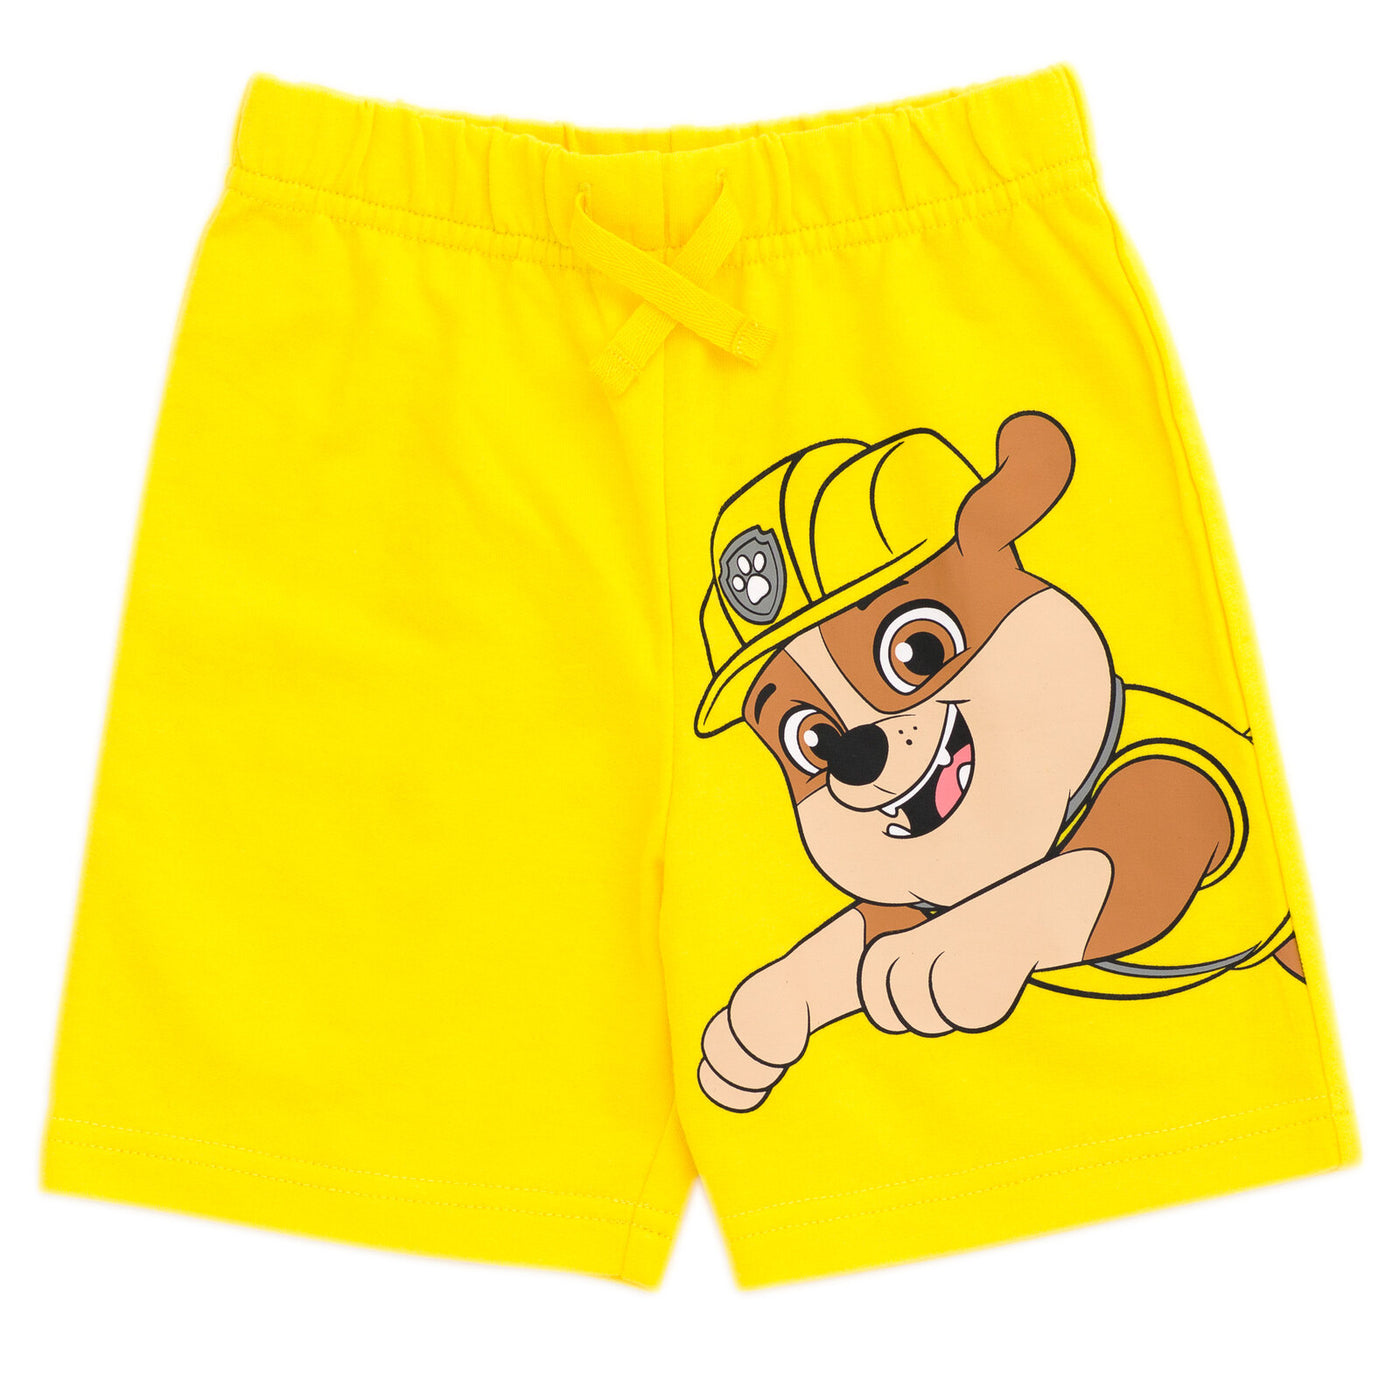 Paw Patrol Rubble Cosplay T-Shirt and Bike Shorts French Terry Outfit Set